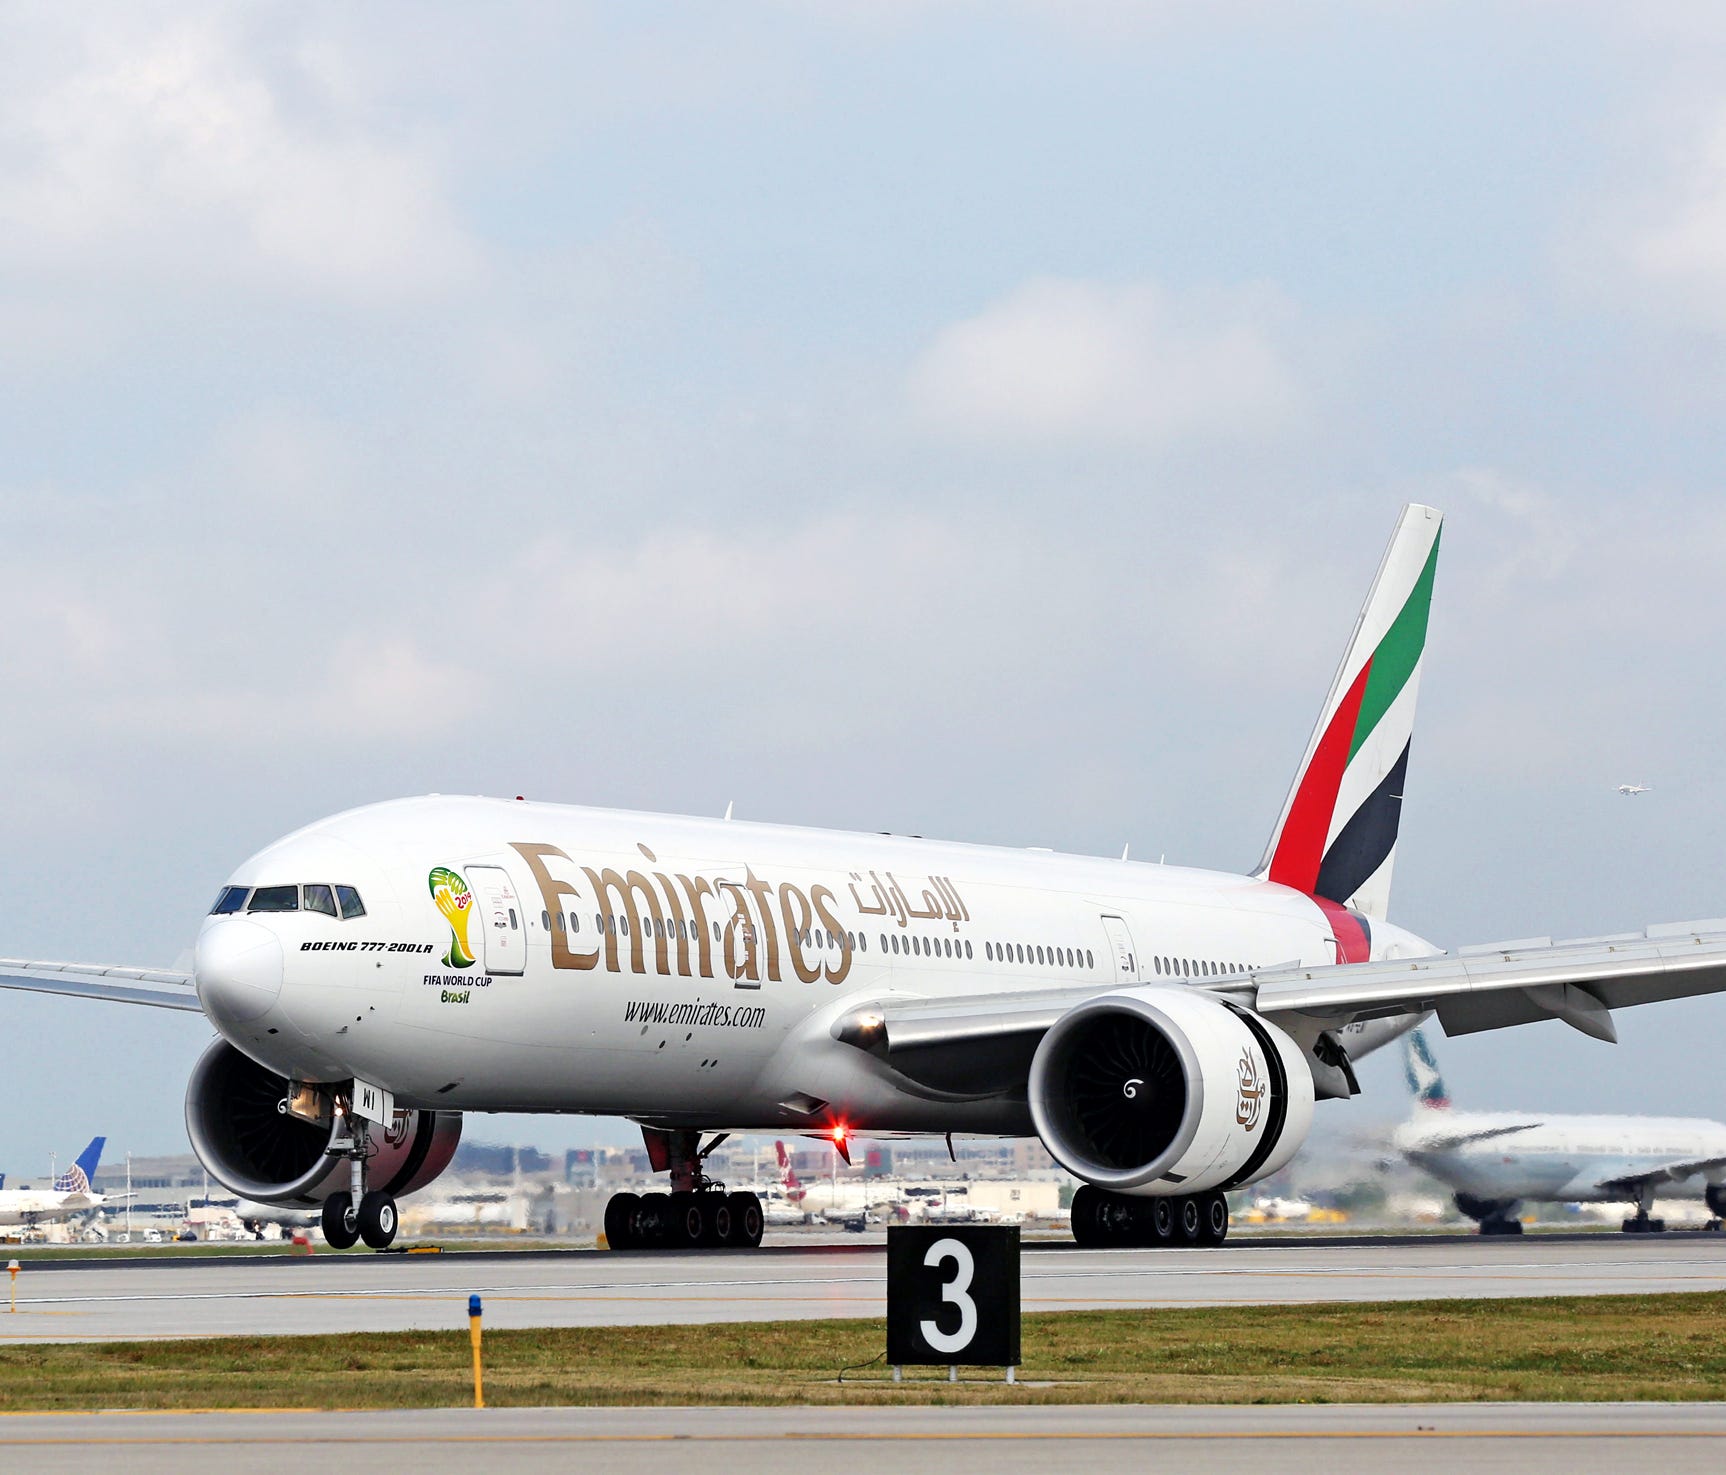 In this file photo from August 2014, an Emirates airline Boeing 777-200LR touches down at O'Hare International Airport for the carrier's inaugural flight into Chicago.